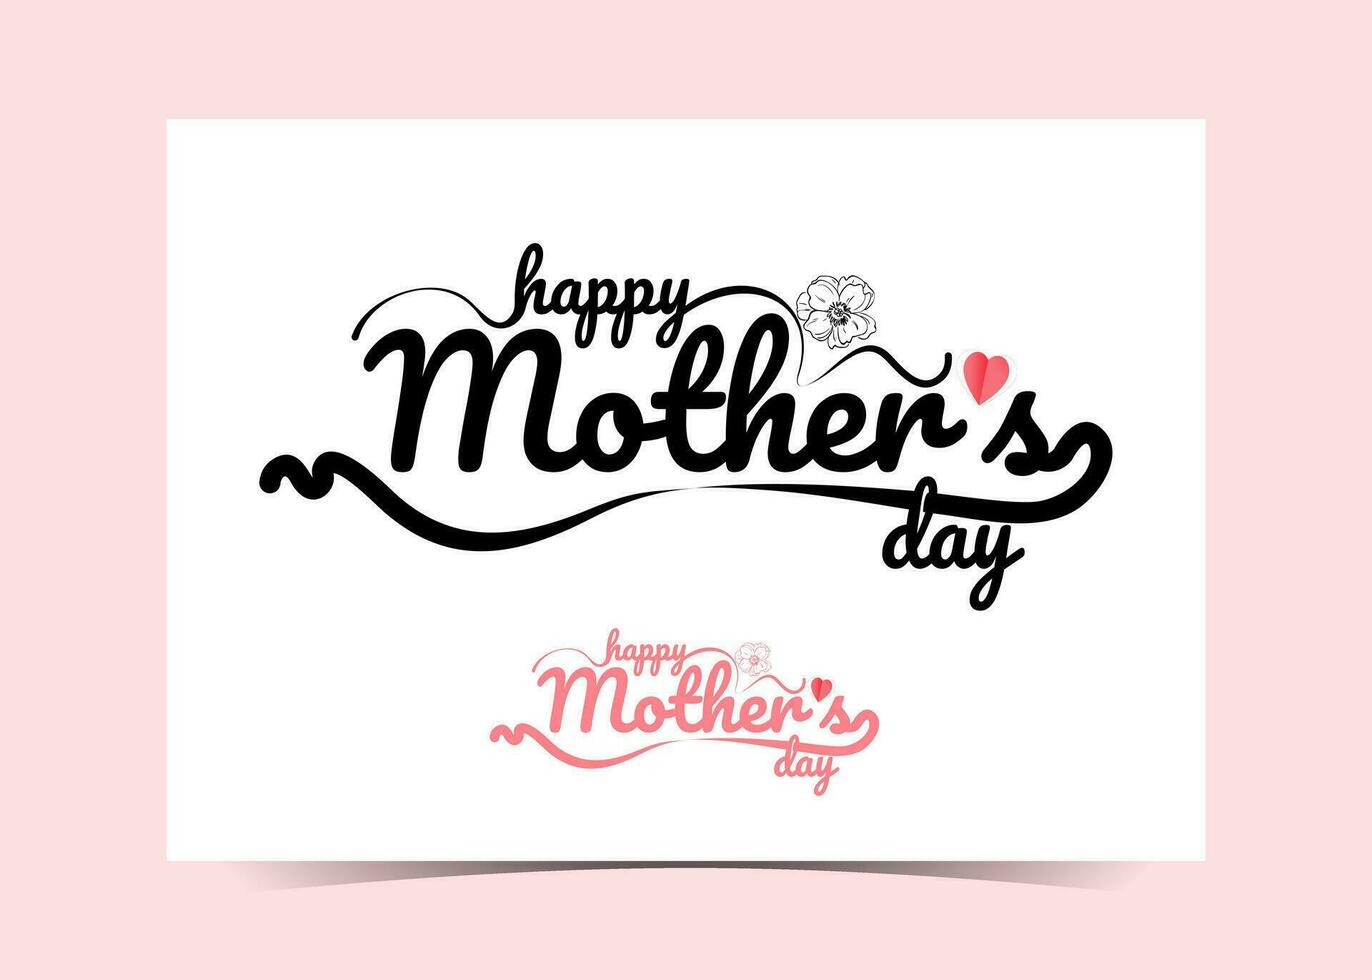 happy mothers day text on pink background vector